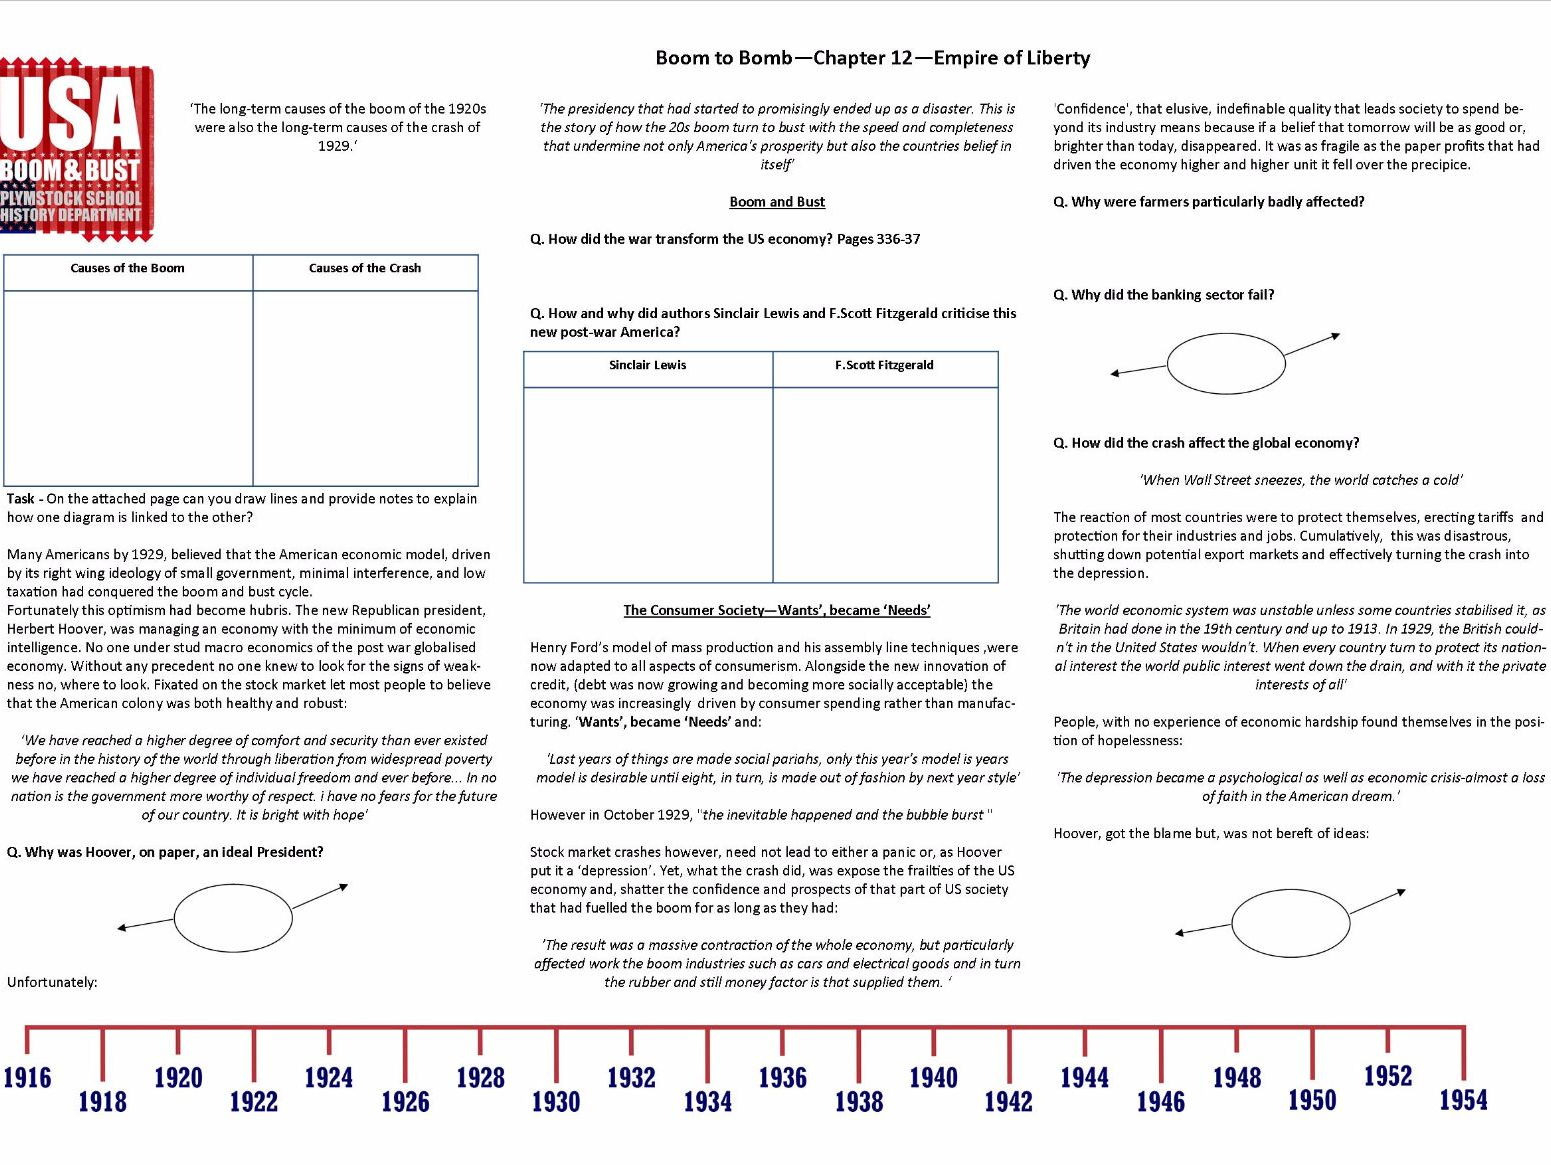 boom-bust-recovery-empire-of-liberty-chapter-12-boom-to-bomb-supporting-worksheet-db-excel